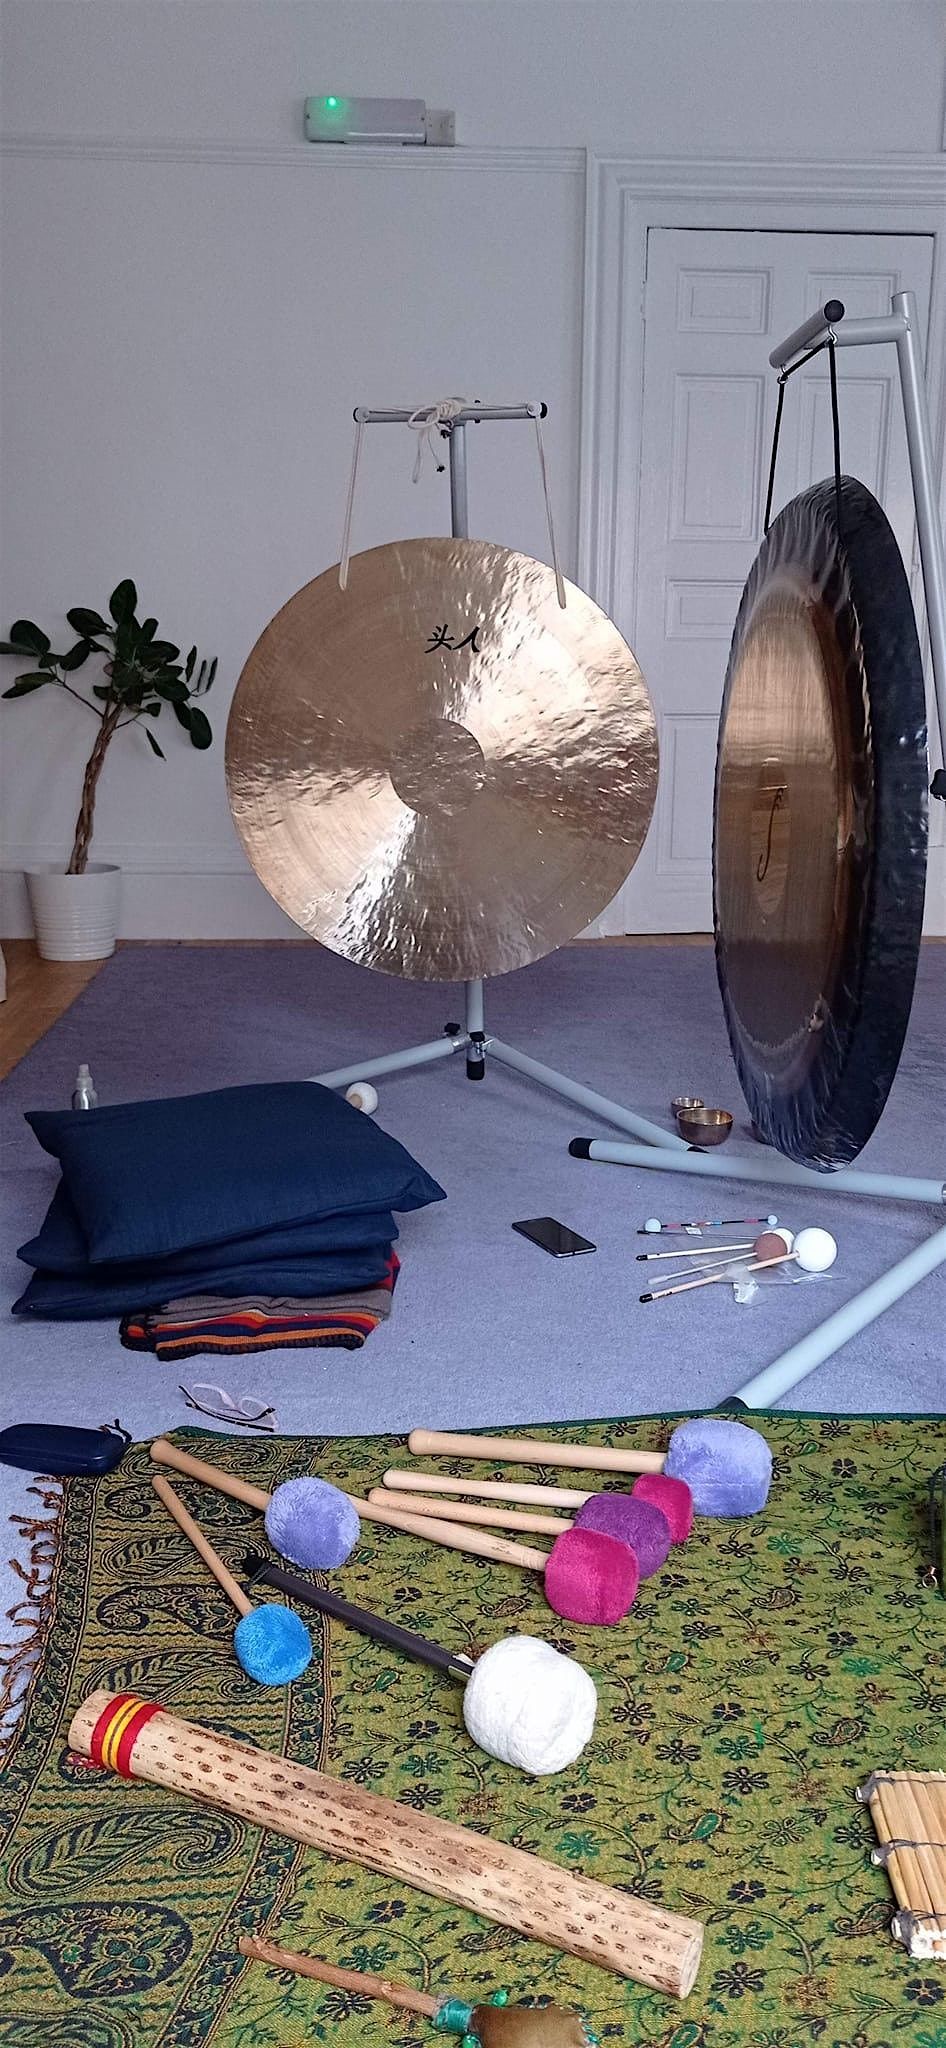 Gong bath and Sound Journey in London Angel Islington